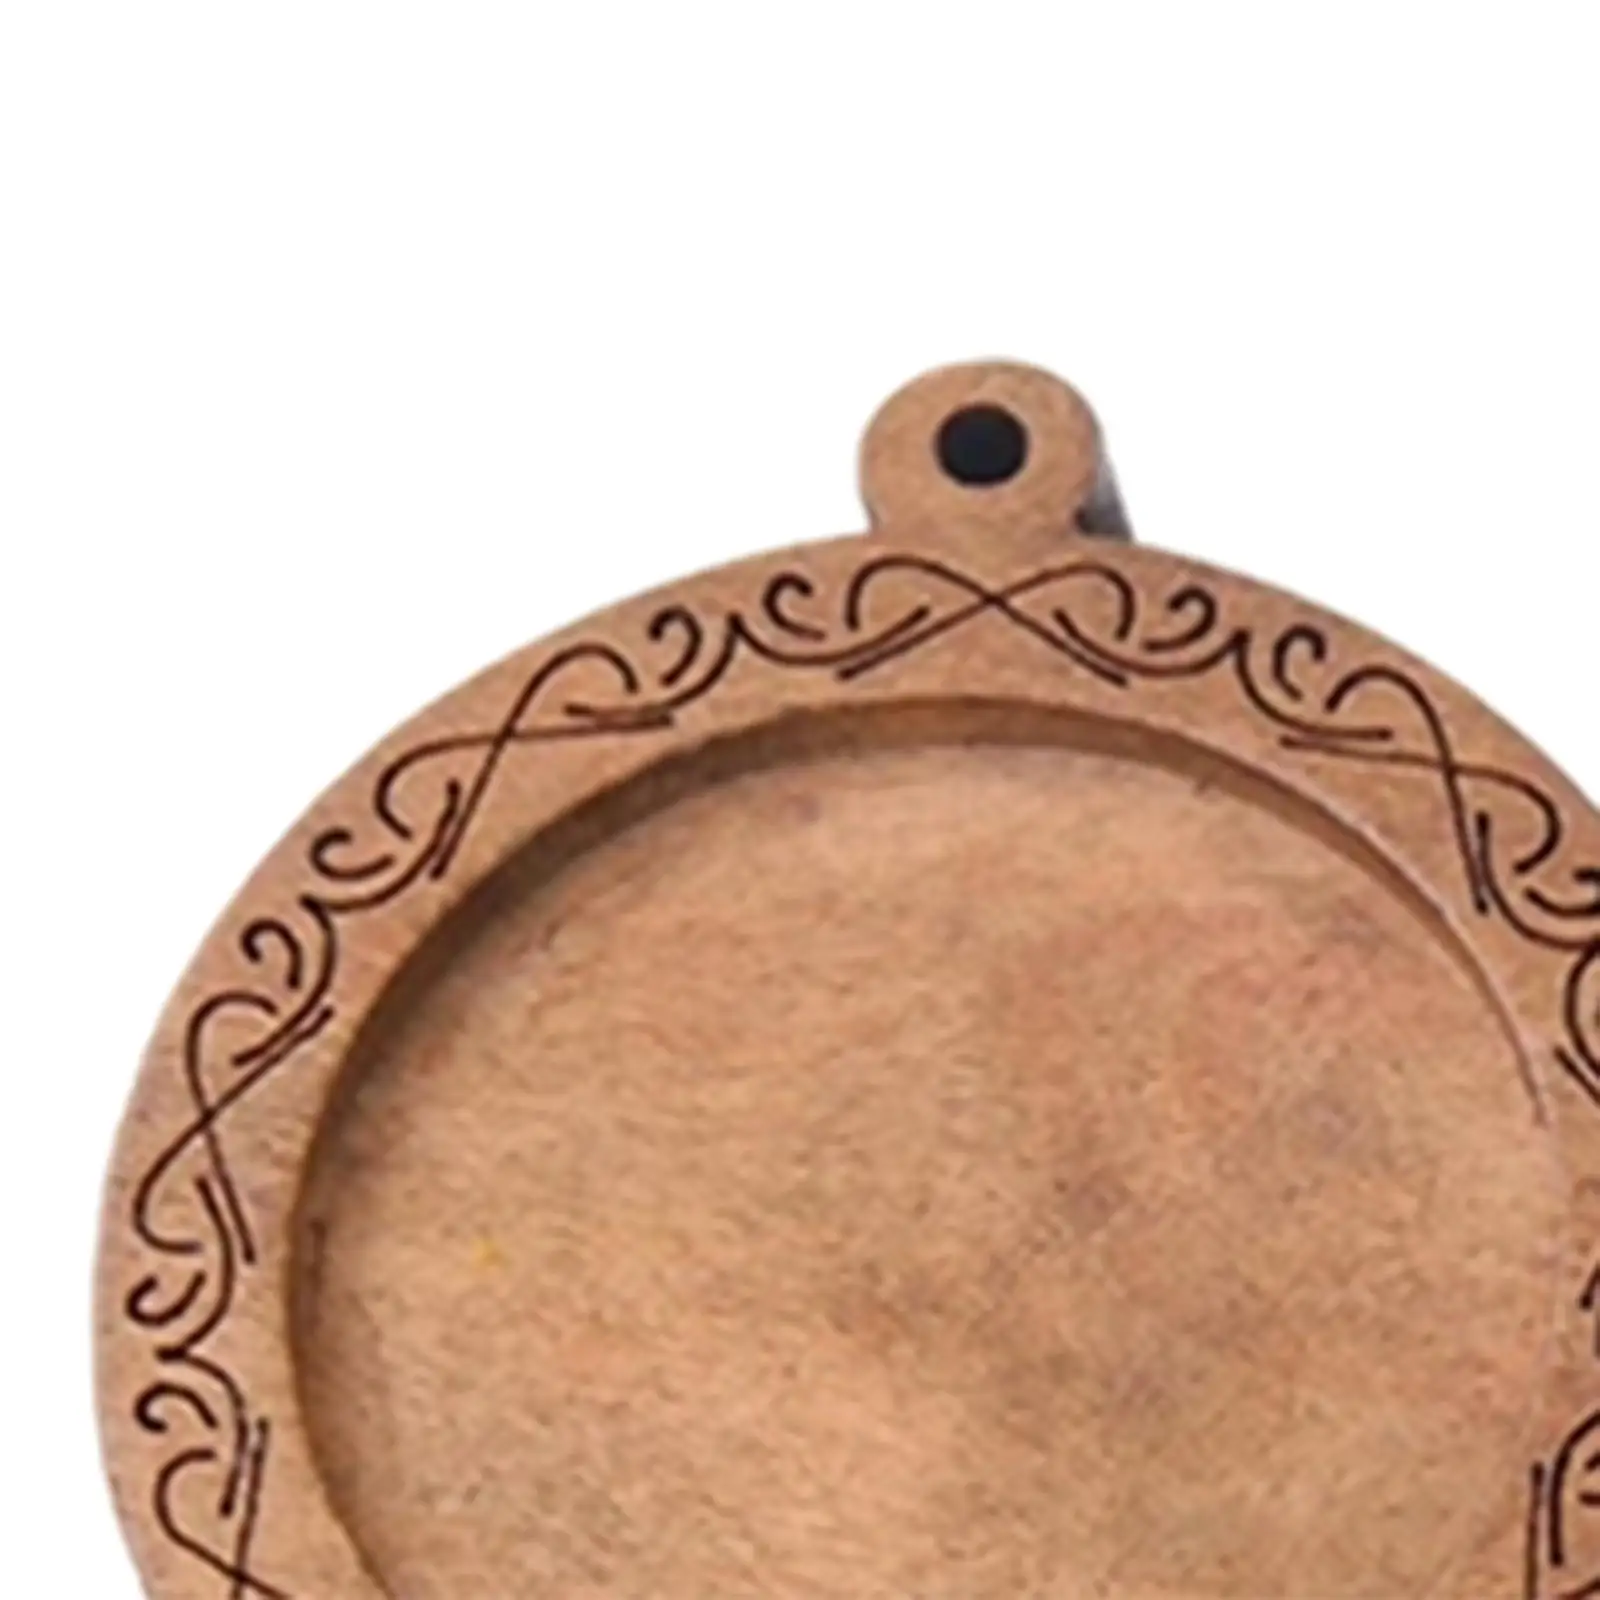 12 Pieces Pendant Trays Wooden Handmade 30mm Charms Cabochaon Trays for Decoration Necklace Jewelry Making DIY Crafting Photo